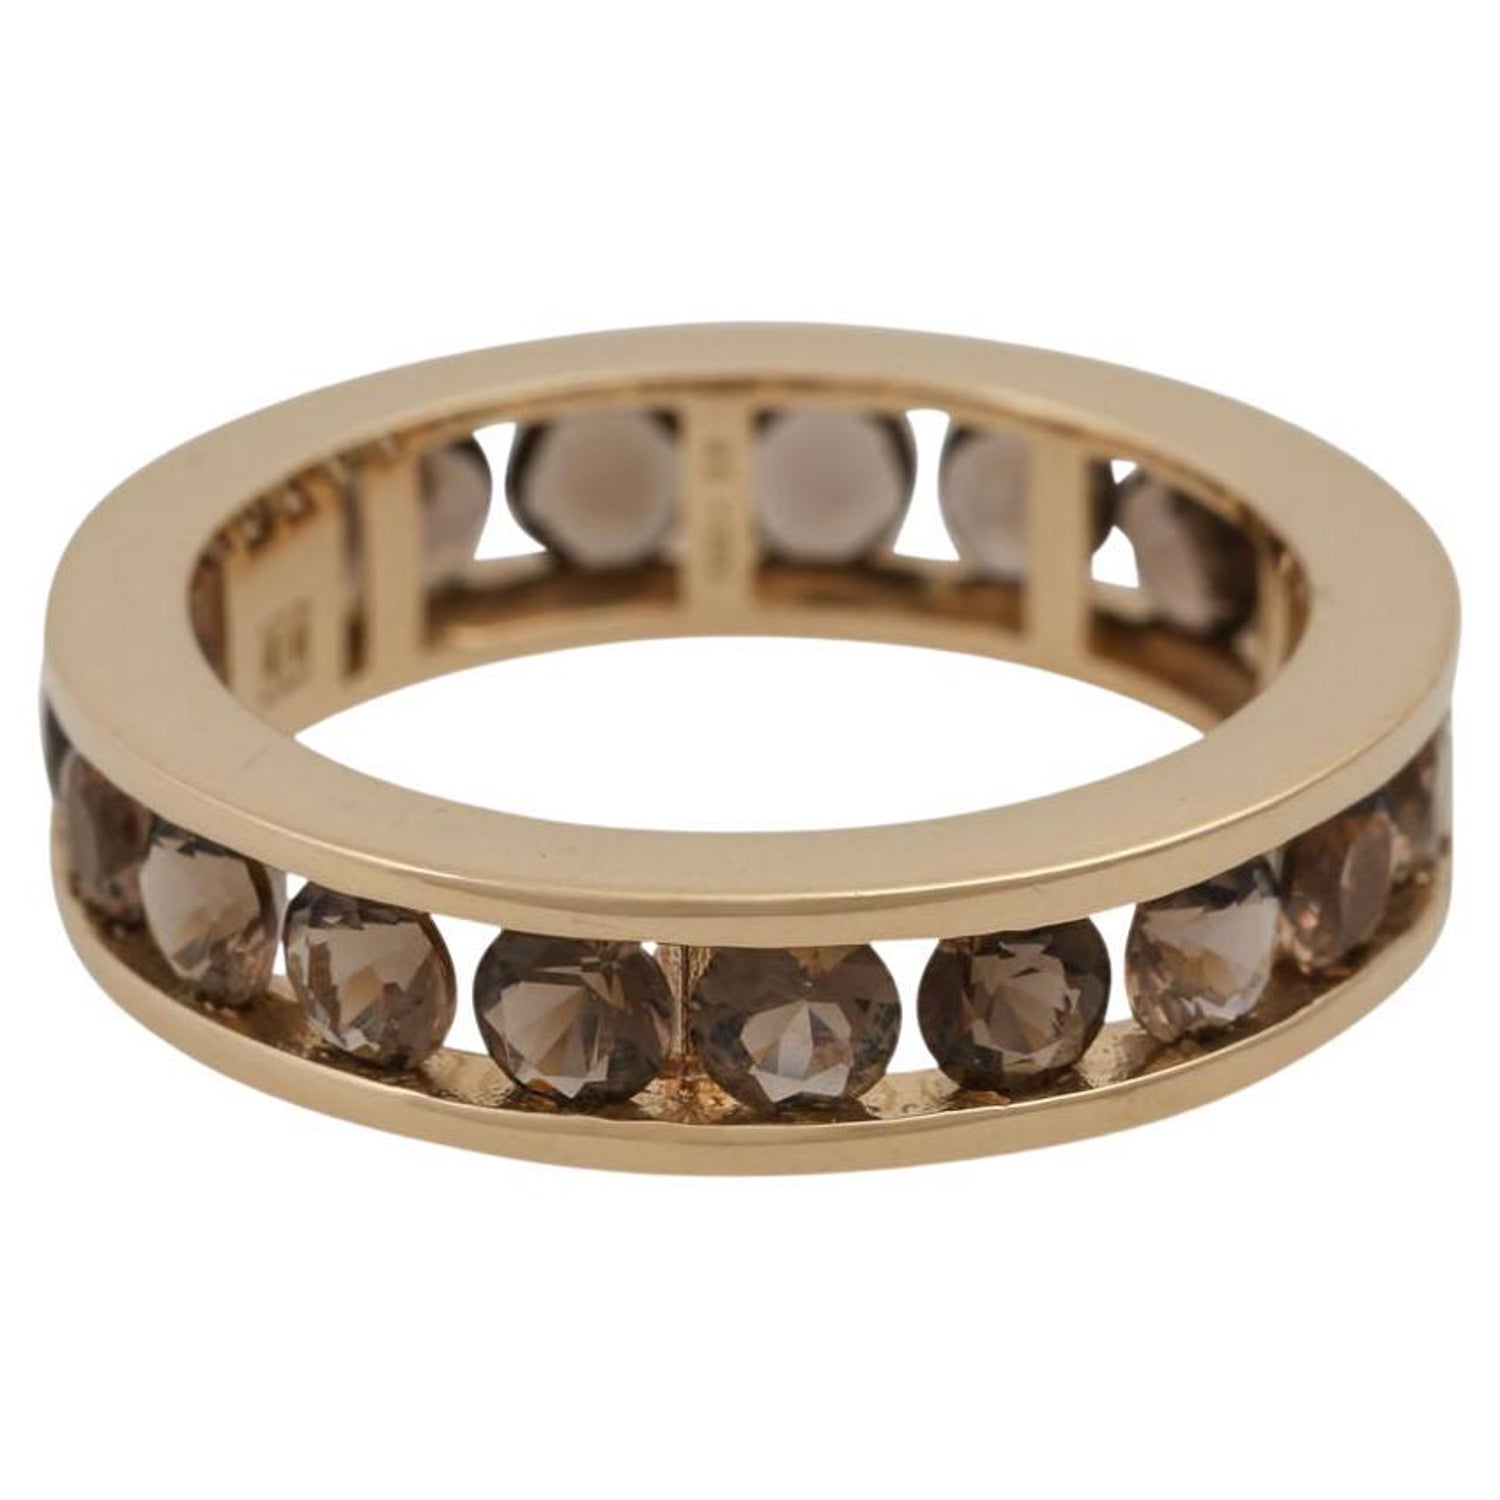 Jette Joop Memory Ring with Smoky Quartz For Sale at 1stDibs